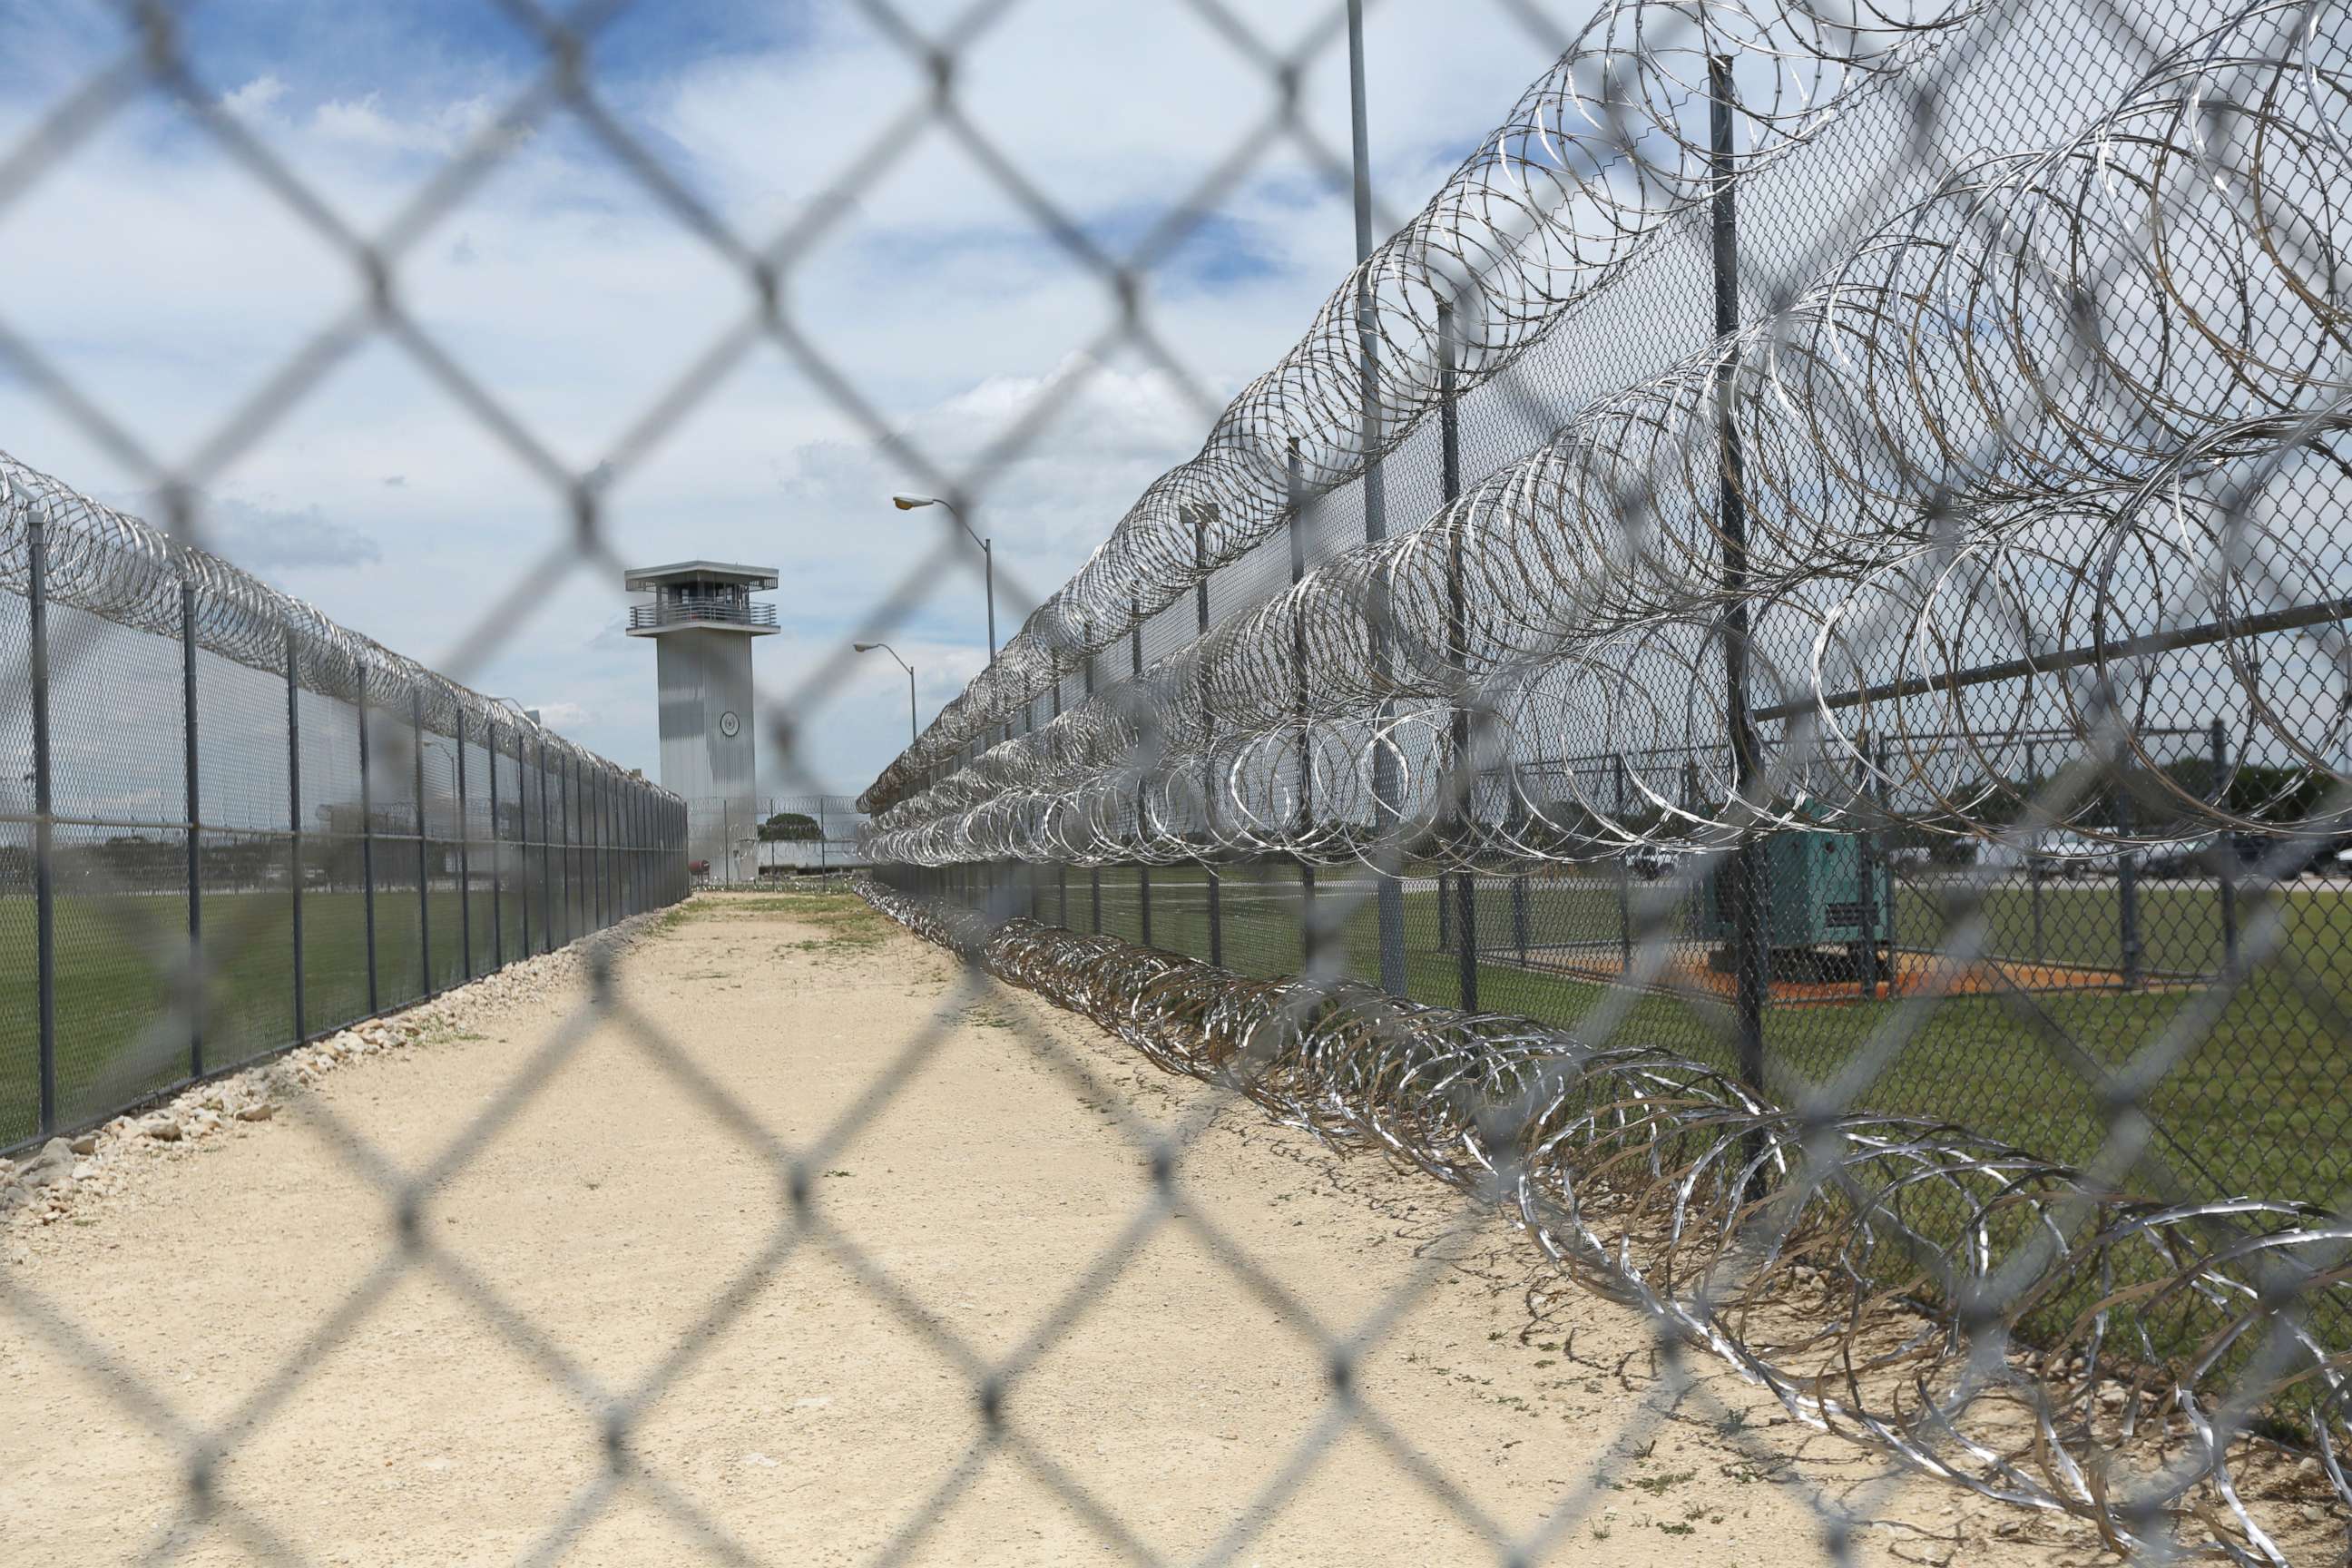 PHOTO: This Wednesday, June 21, 2017 file photo shows barbed wire surrounding the prison in Gatesville, Texas.